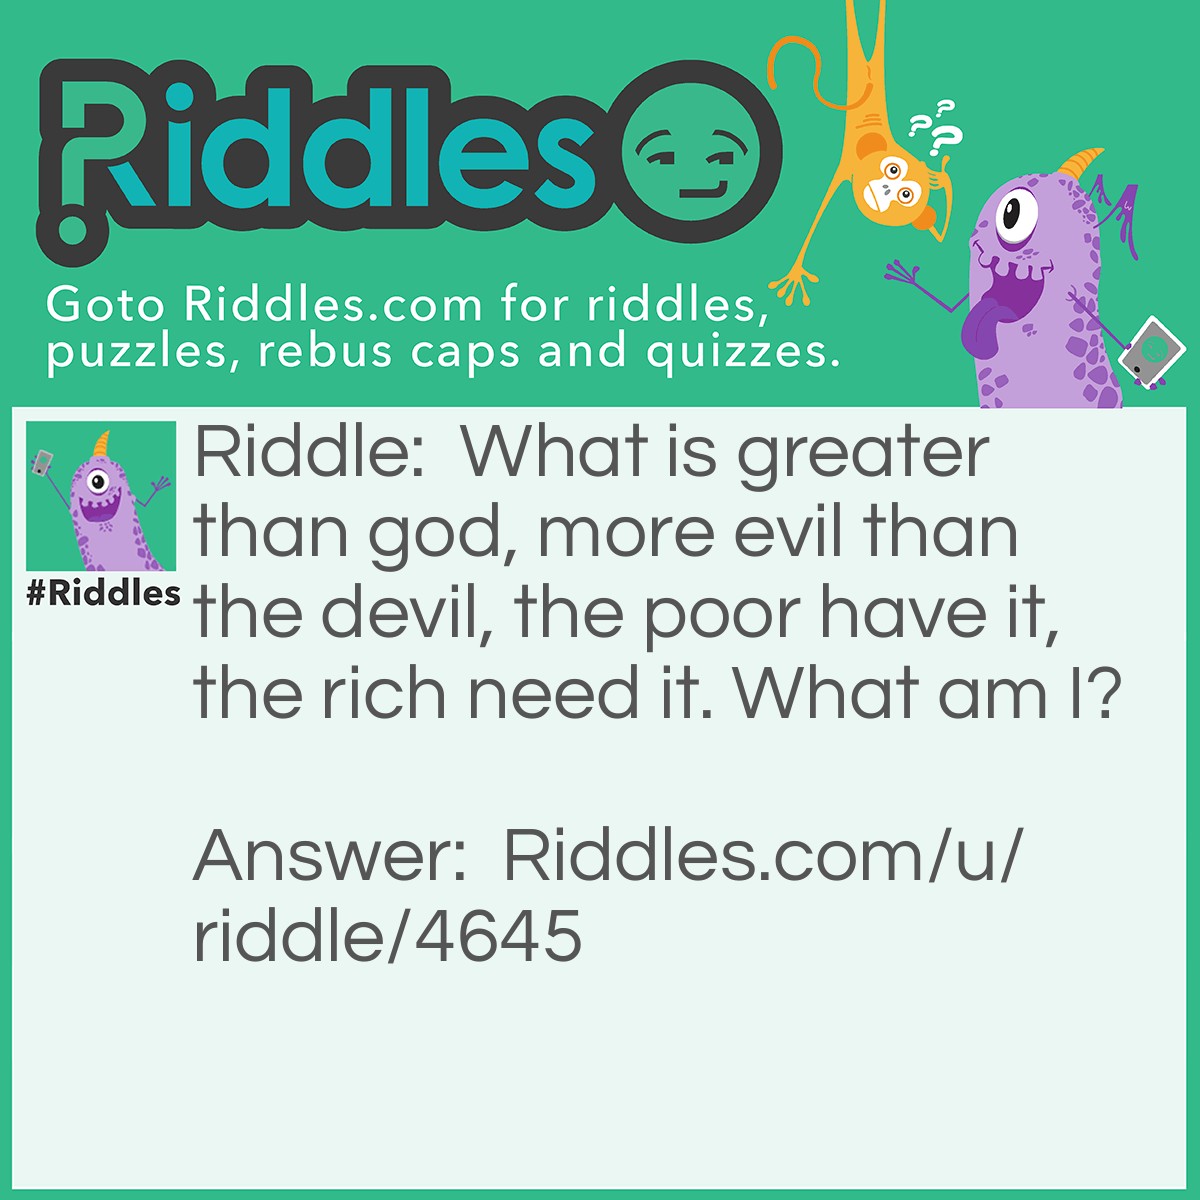 Riddle: What is greater than god, more evil than the devil, the poor have it, the rich need it. What am I? Answer: Nothing.